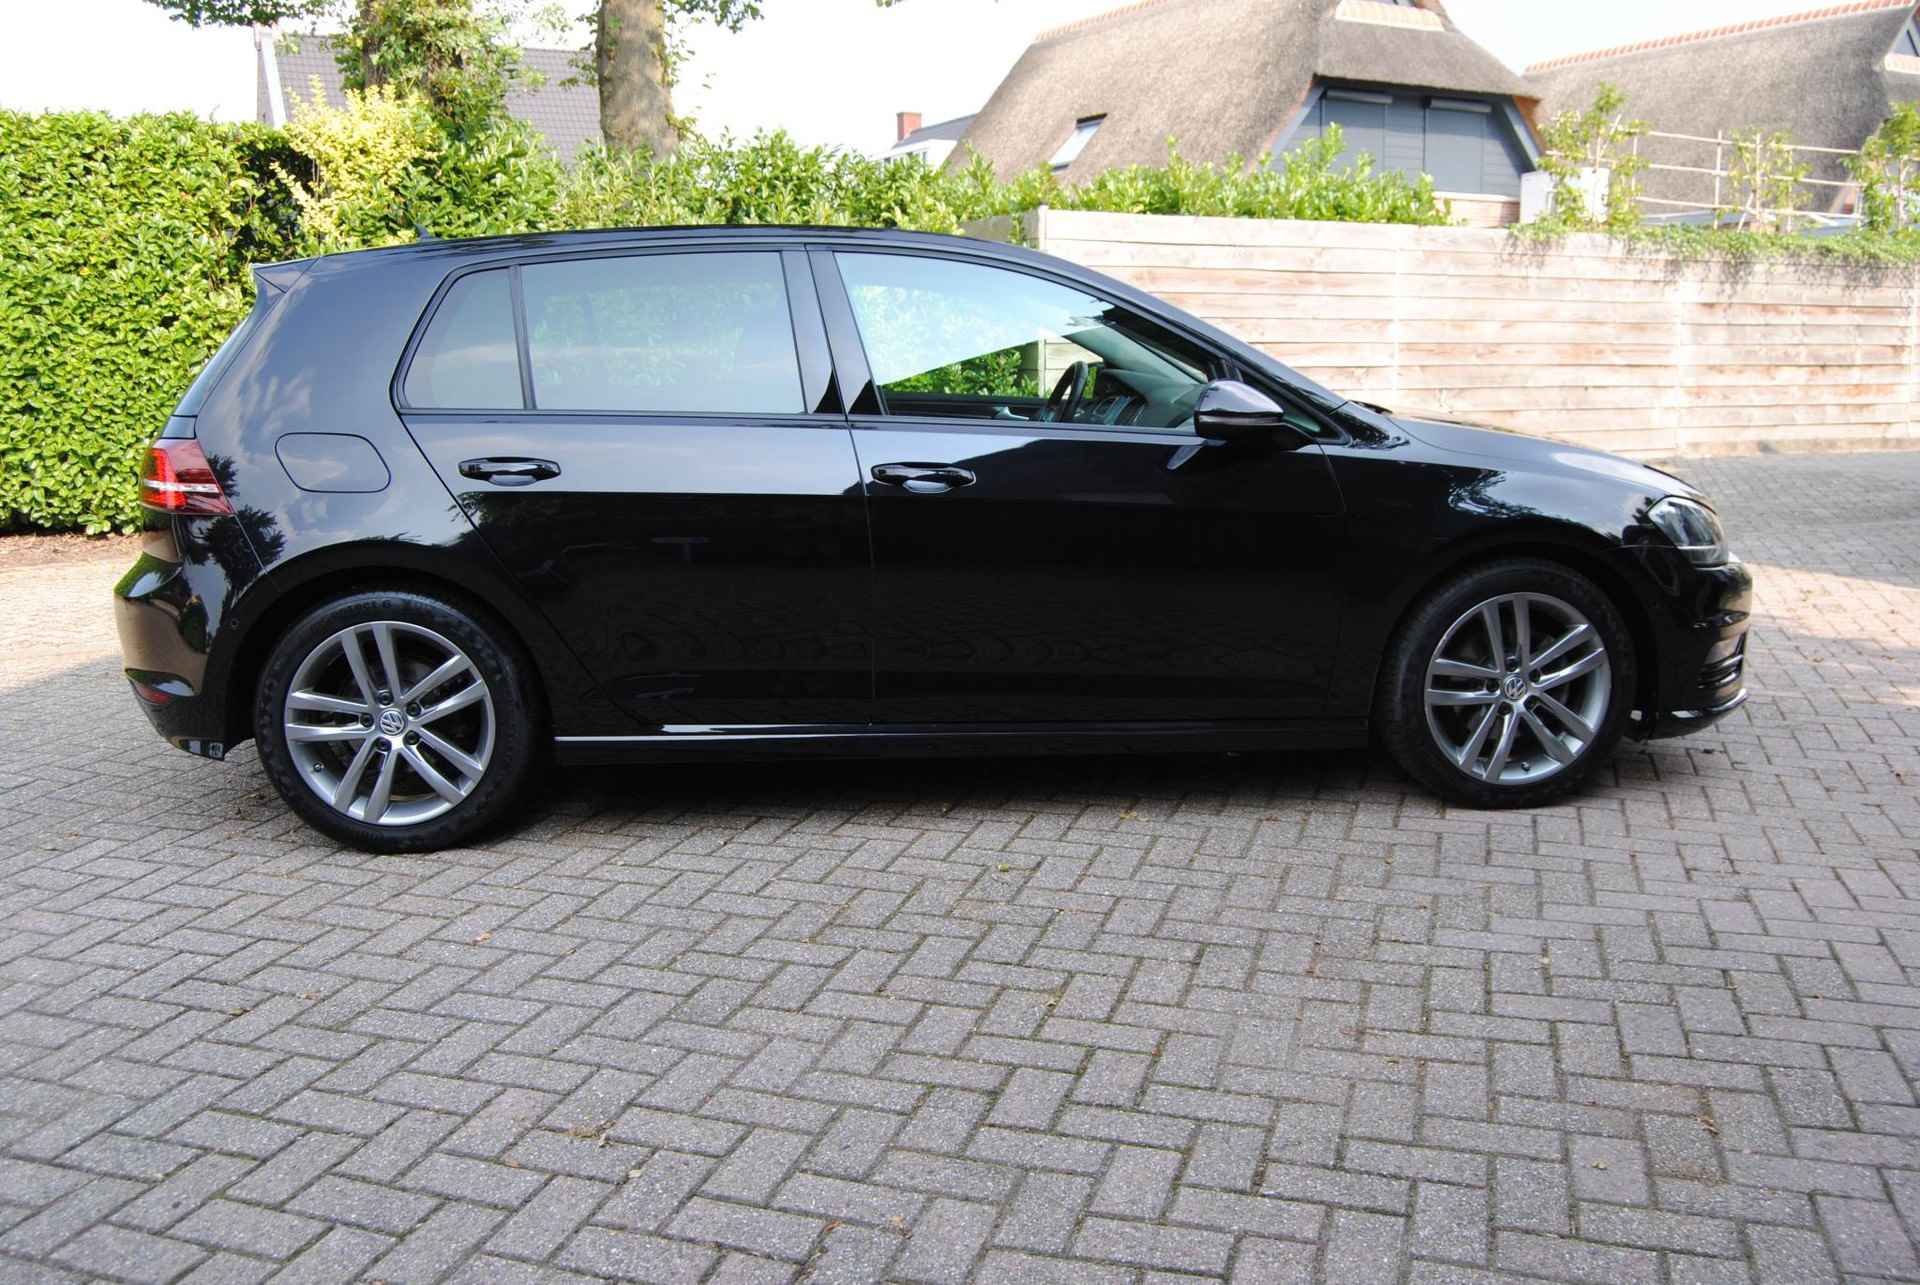 Volkswagen Golf 1.4 TSI Highline Business R-Line Navigatie, adaptive cruise controle, Bluetooth, Climate controle - 14/27